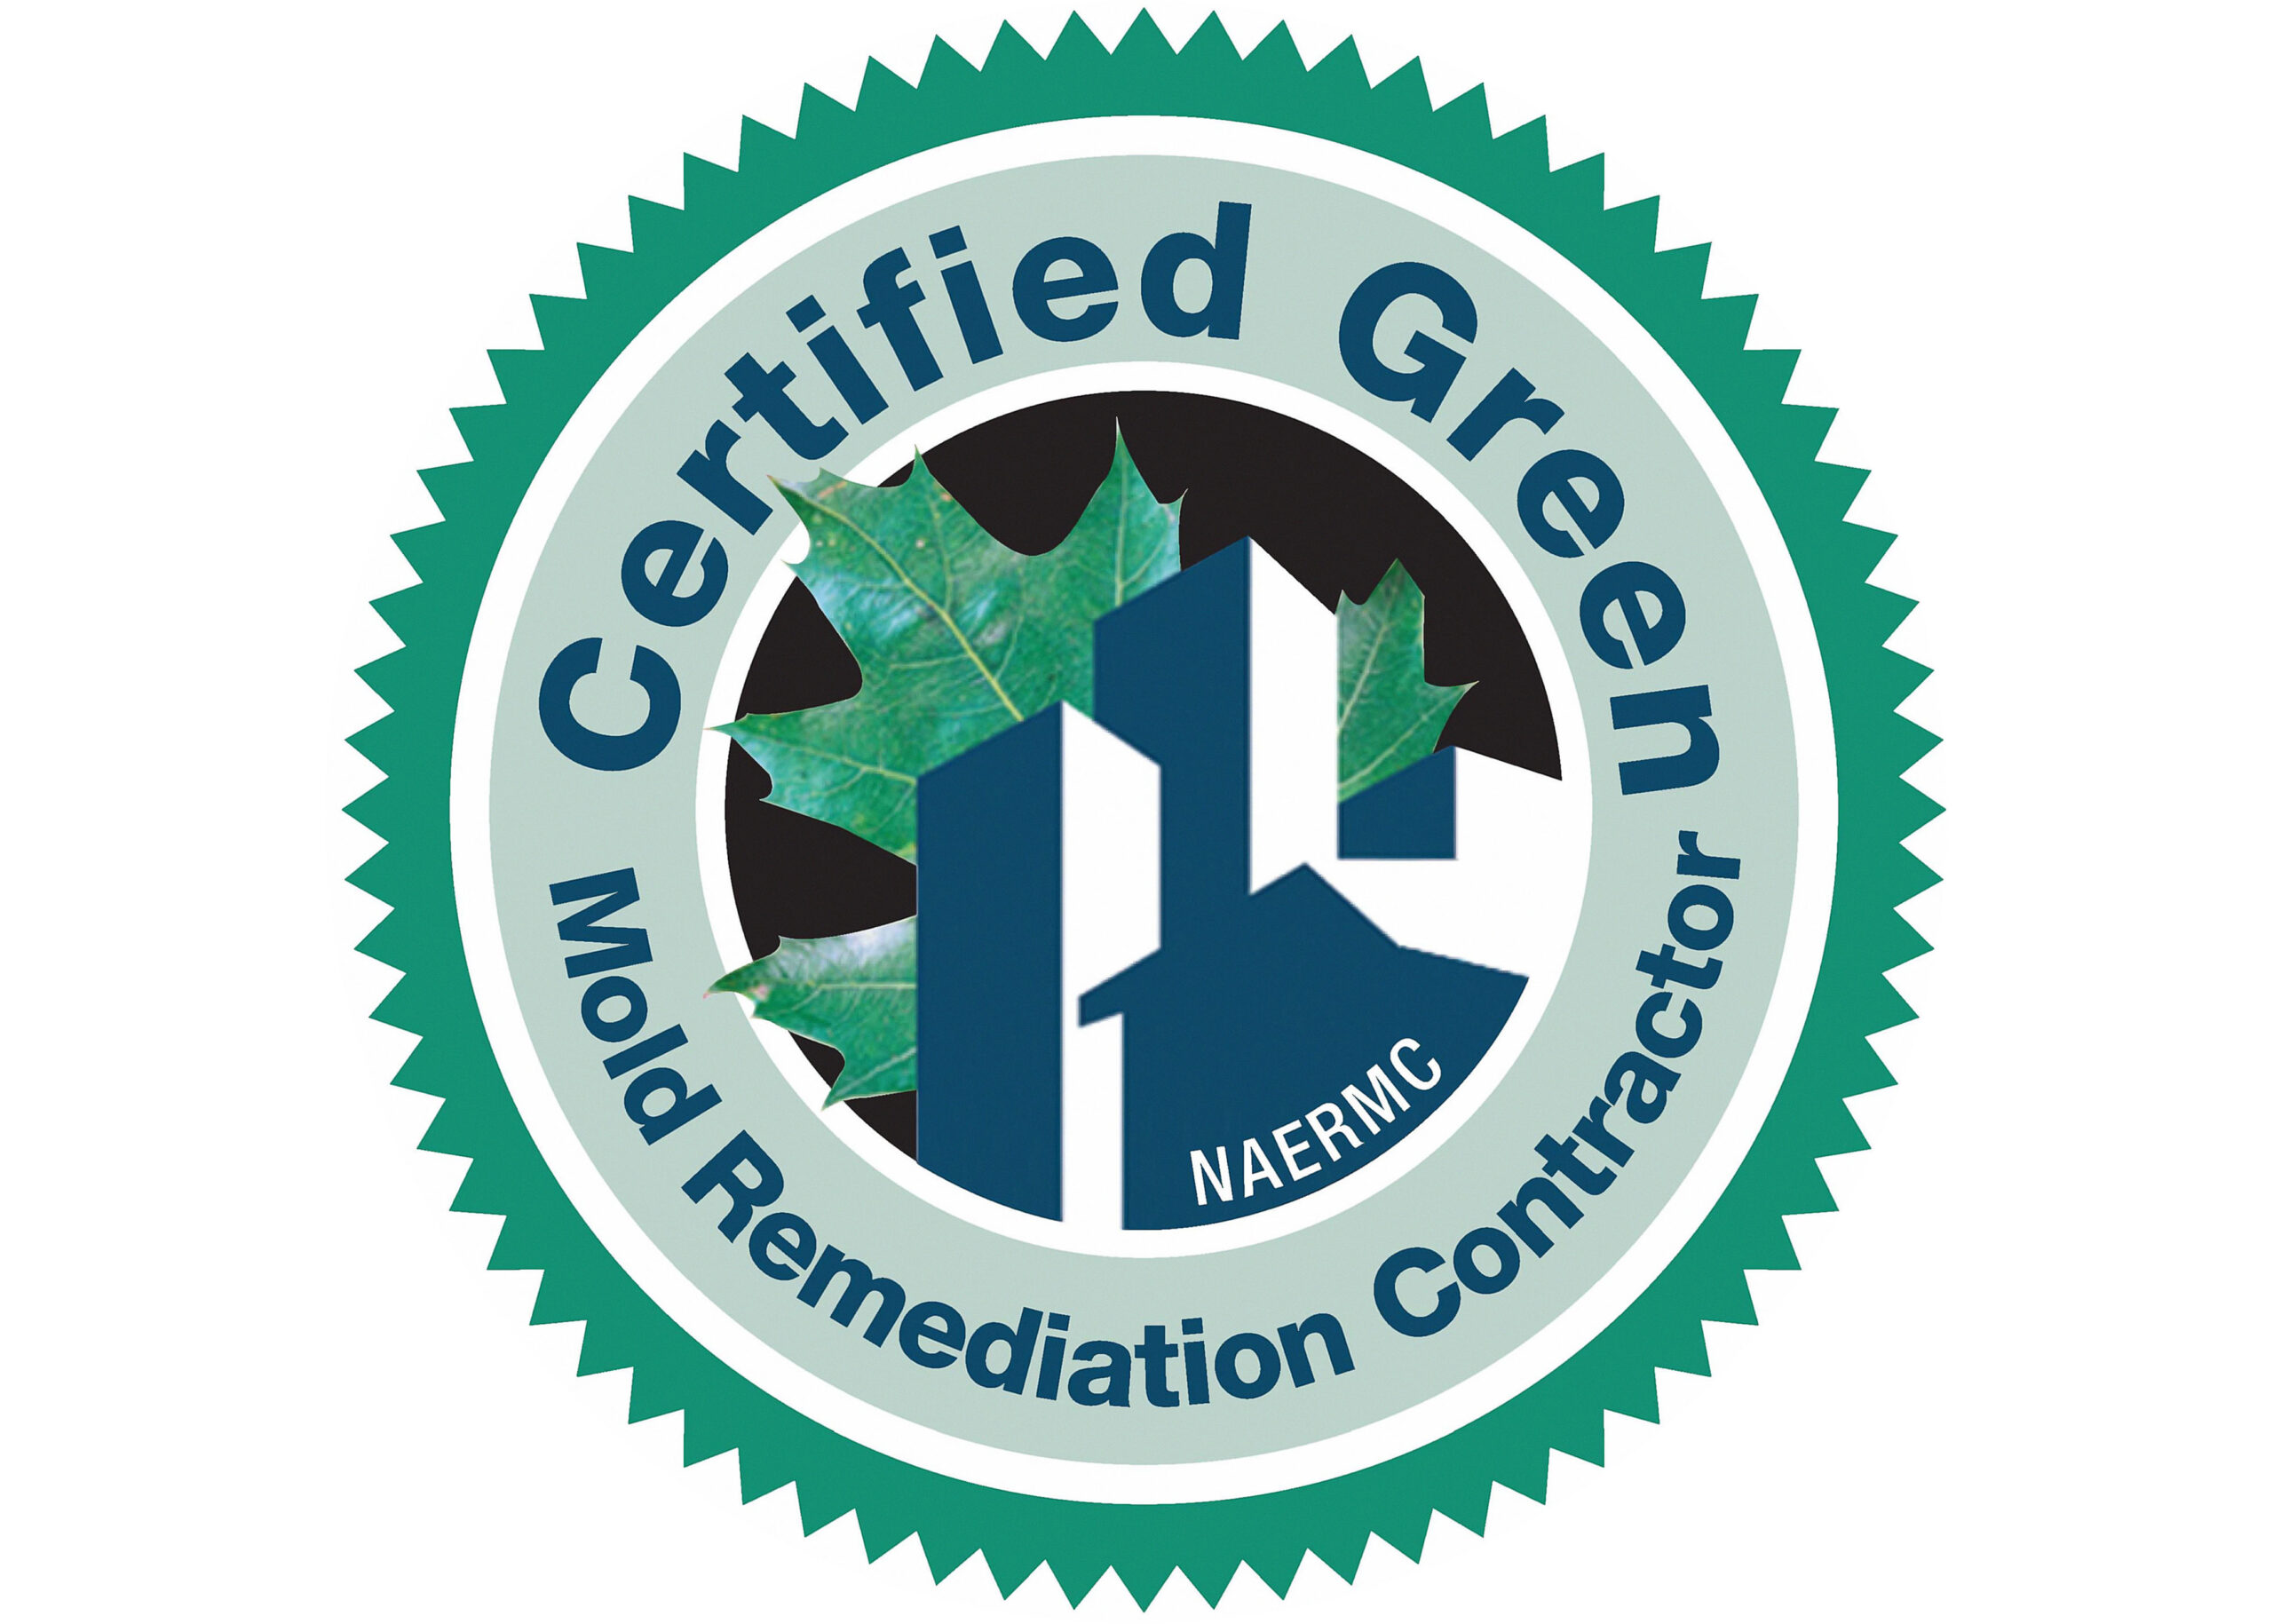 Certified Green Air Quality Mold